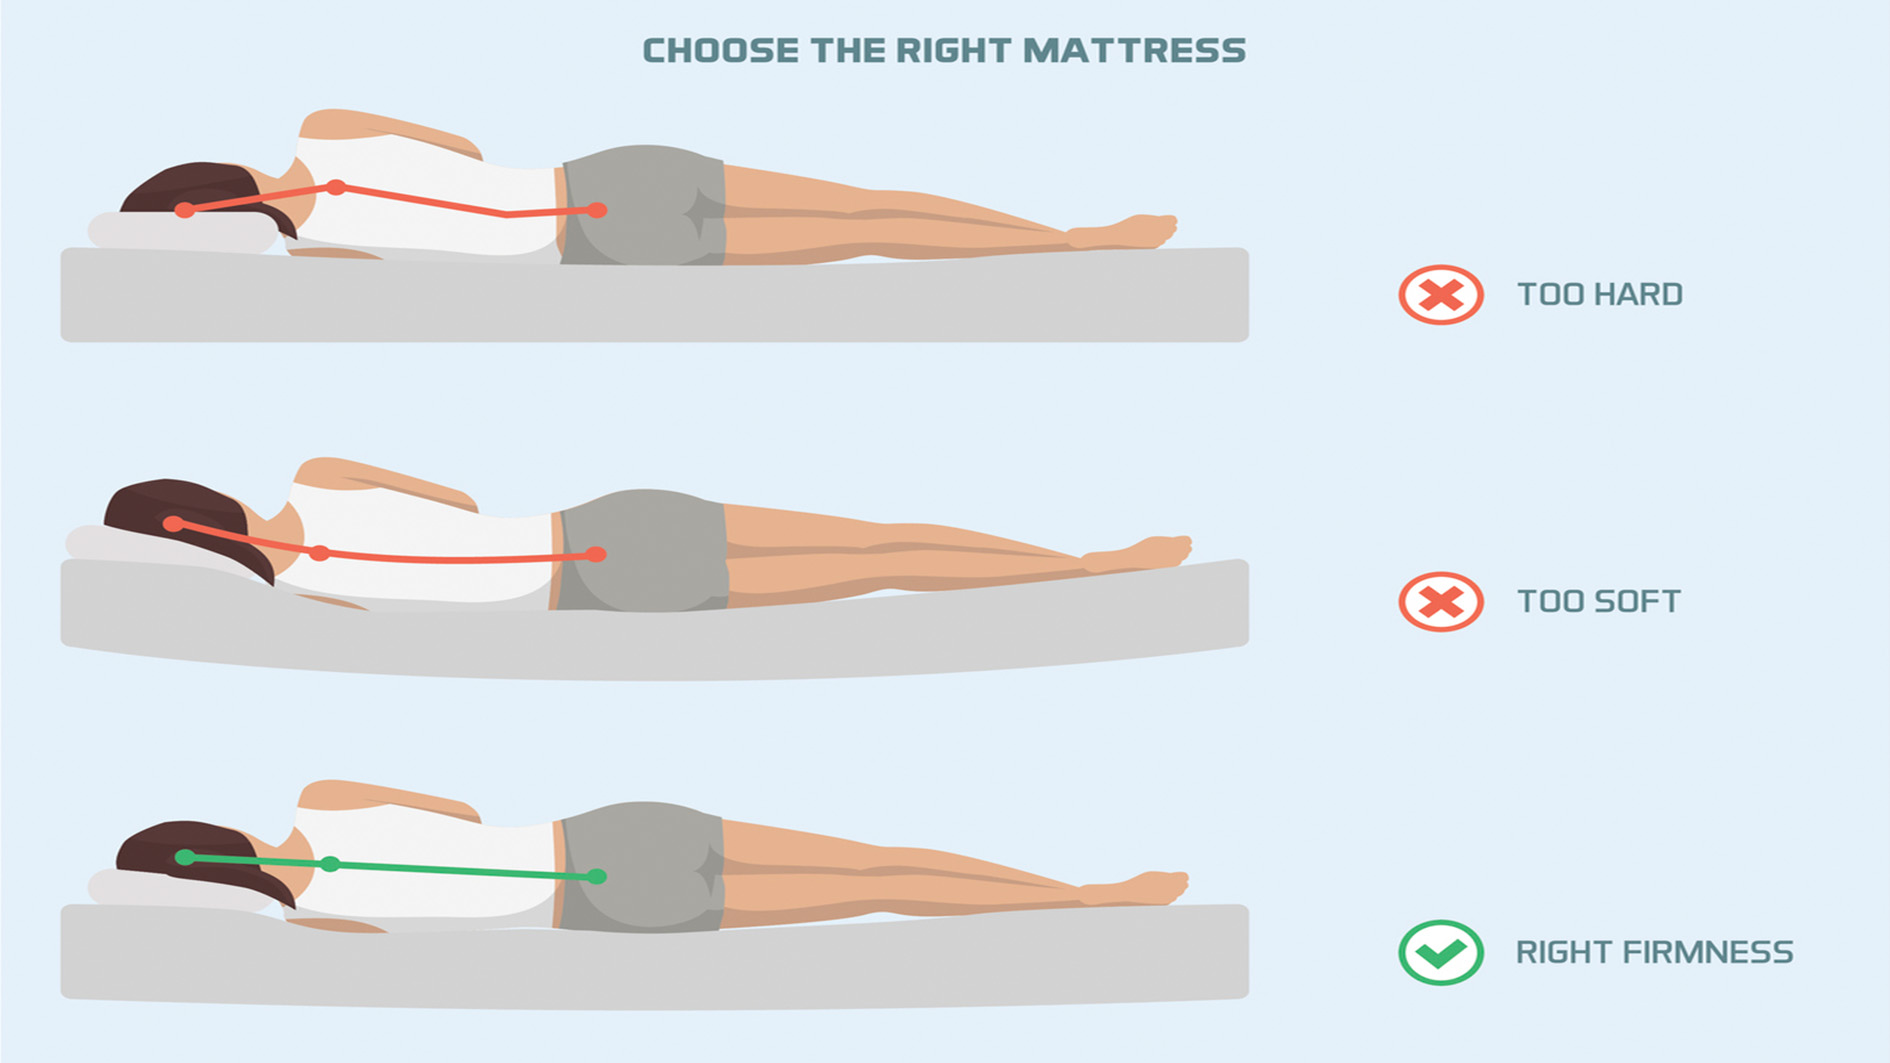 Illustration shows how different mattress firmnesses affect sleep comfort and spinal alignment